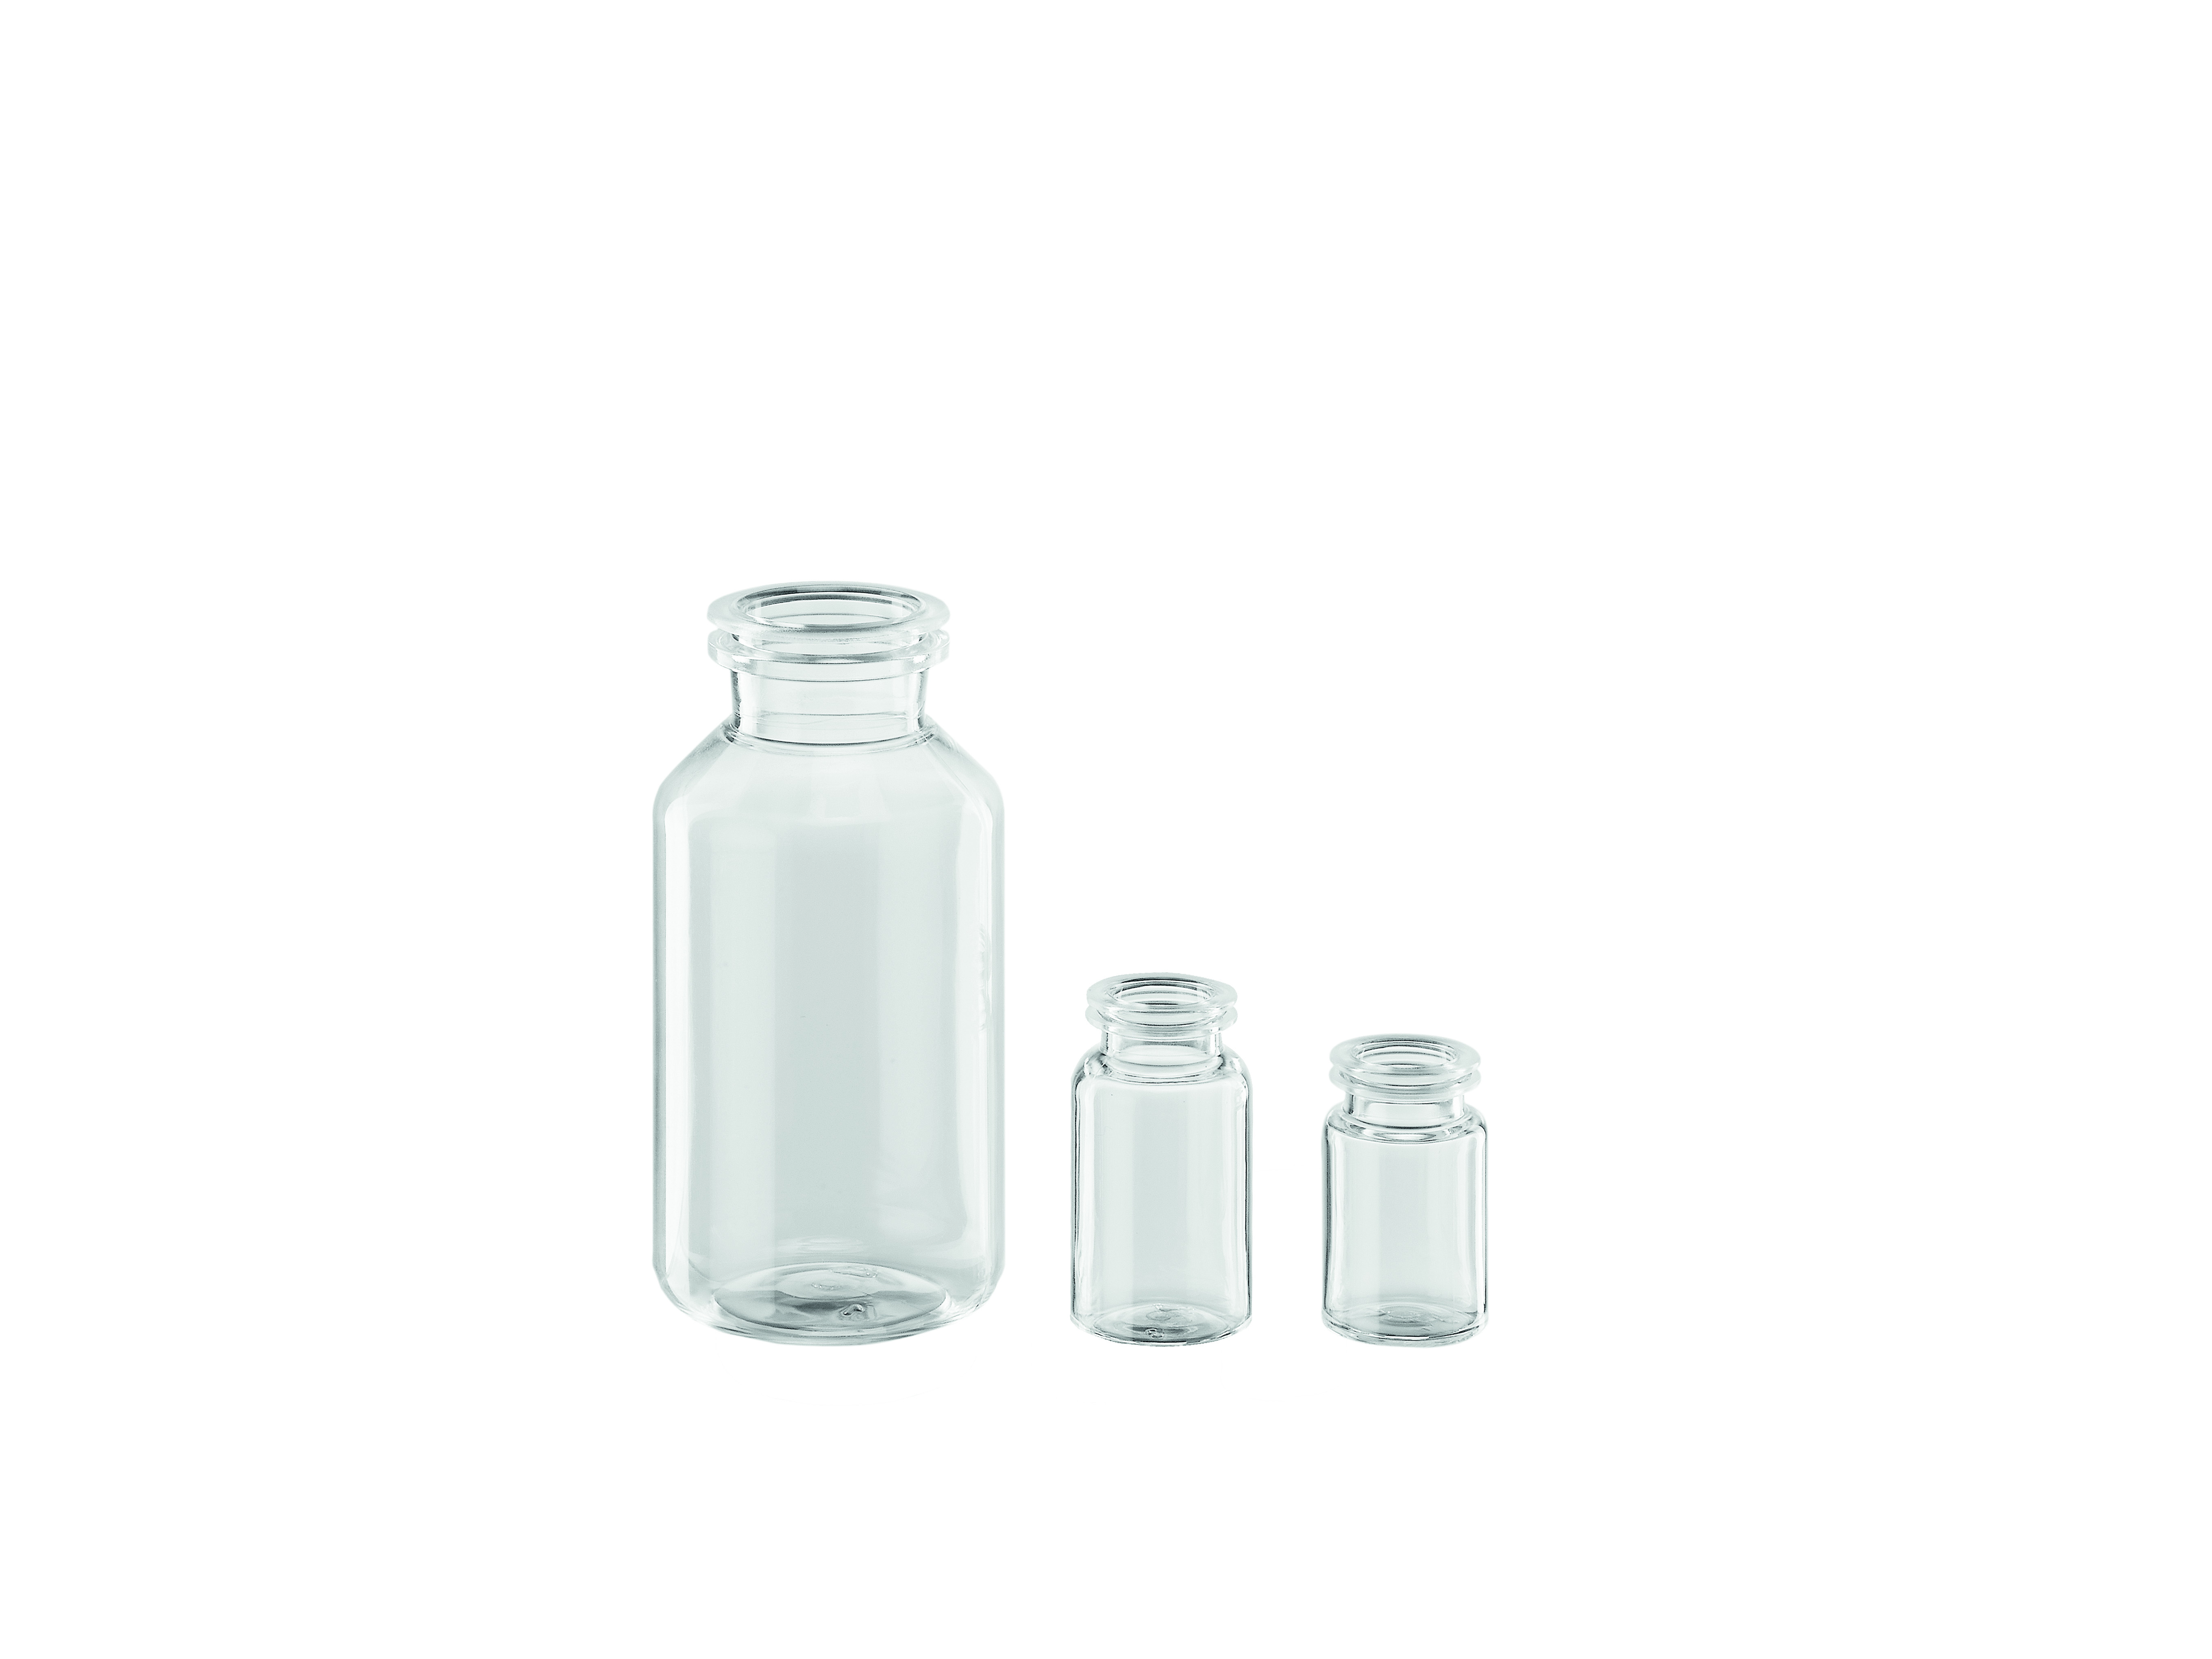 COP injection bottles with crimp neck finish